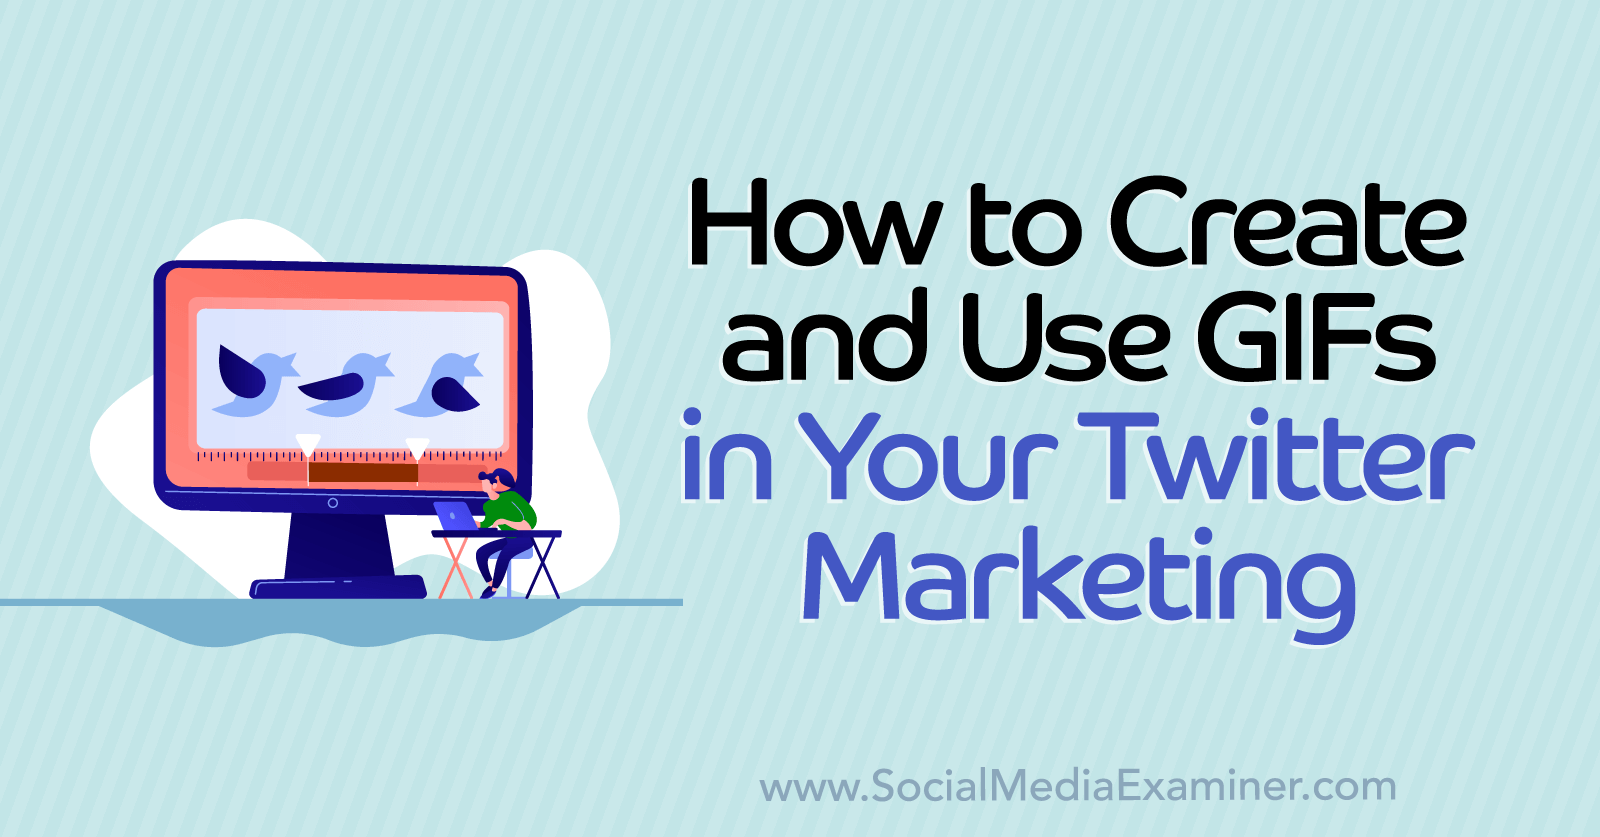 how to create and use gifs in your twitter marketing-Social Media Examiner